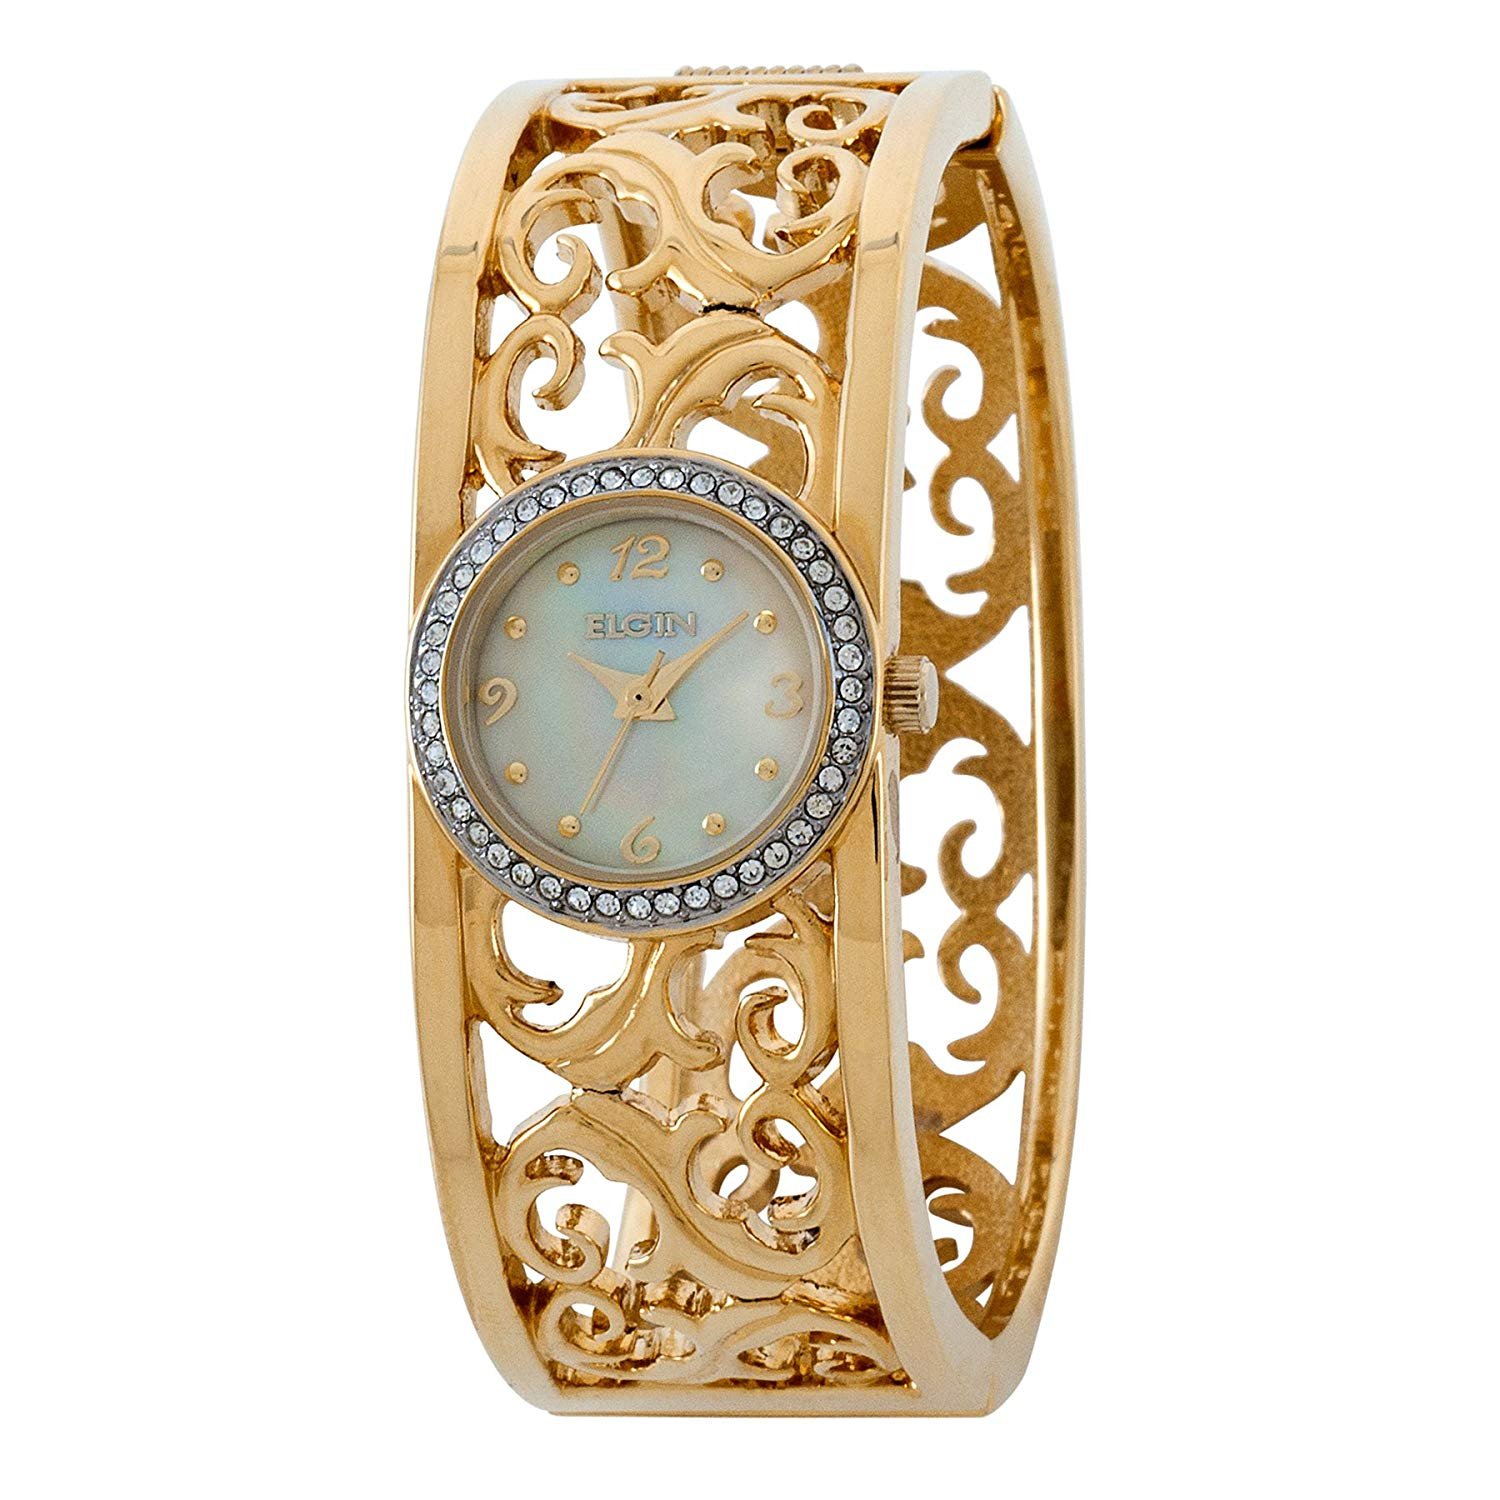 Model: Women's Elgin Gold Color Watch with White Mother of Pearl Dial and Czech Crystal with Accented Bangle